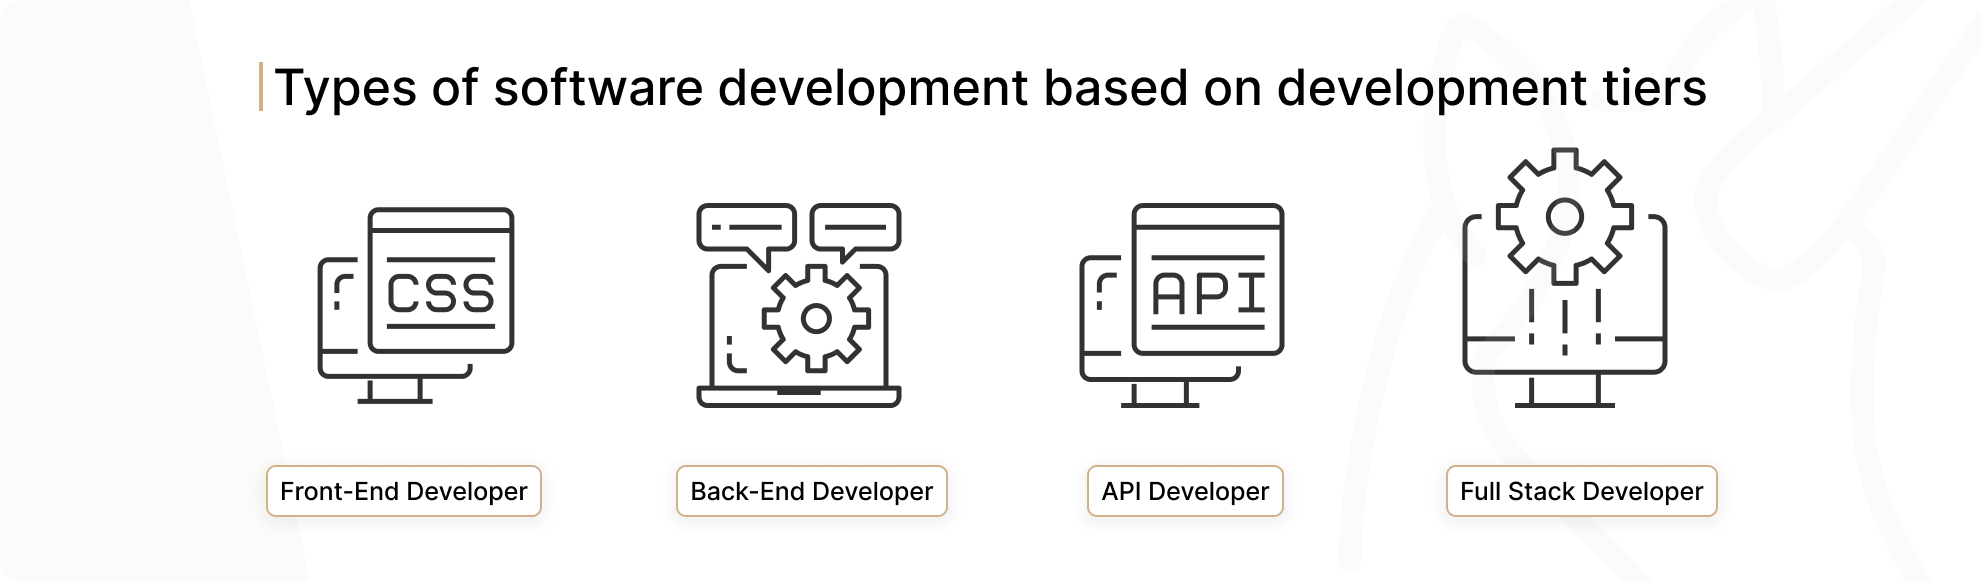 Types of Software Developers Based On Development Tier